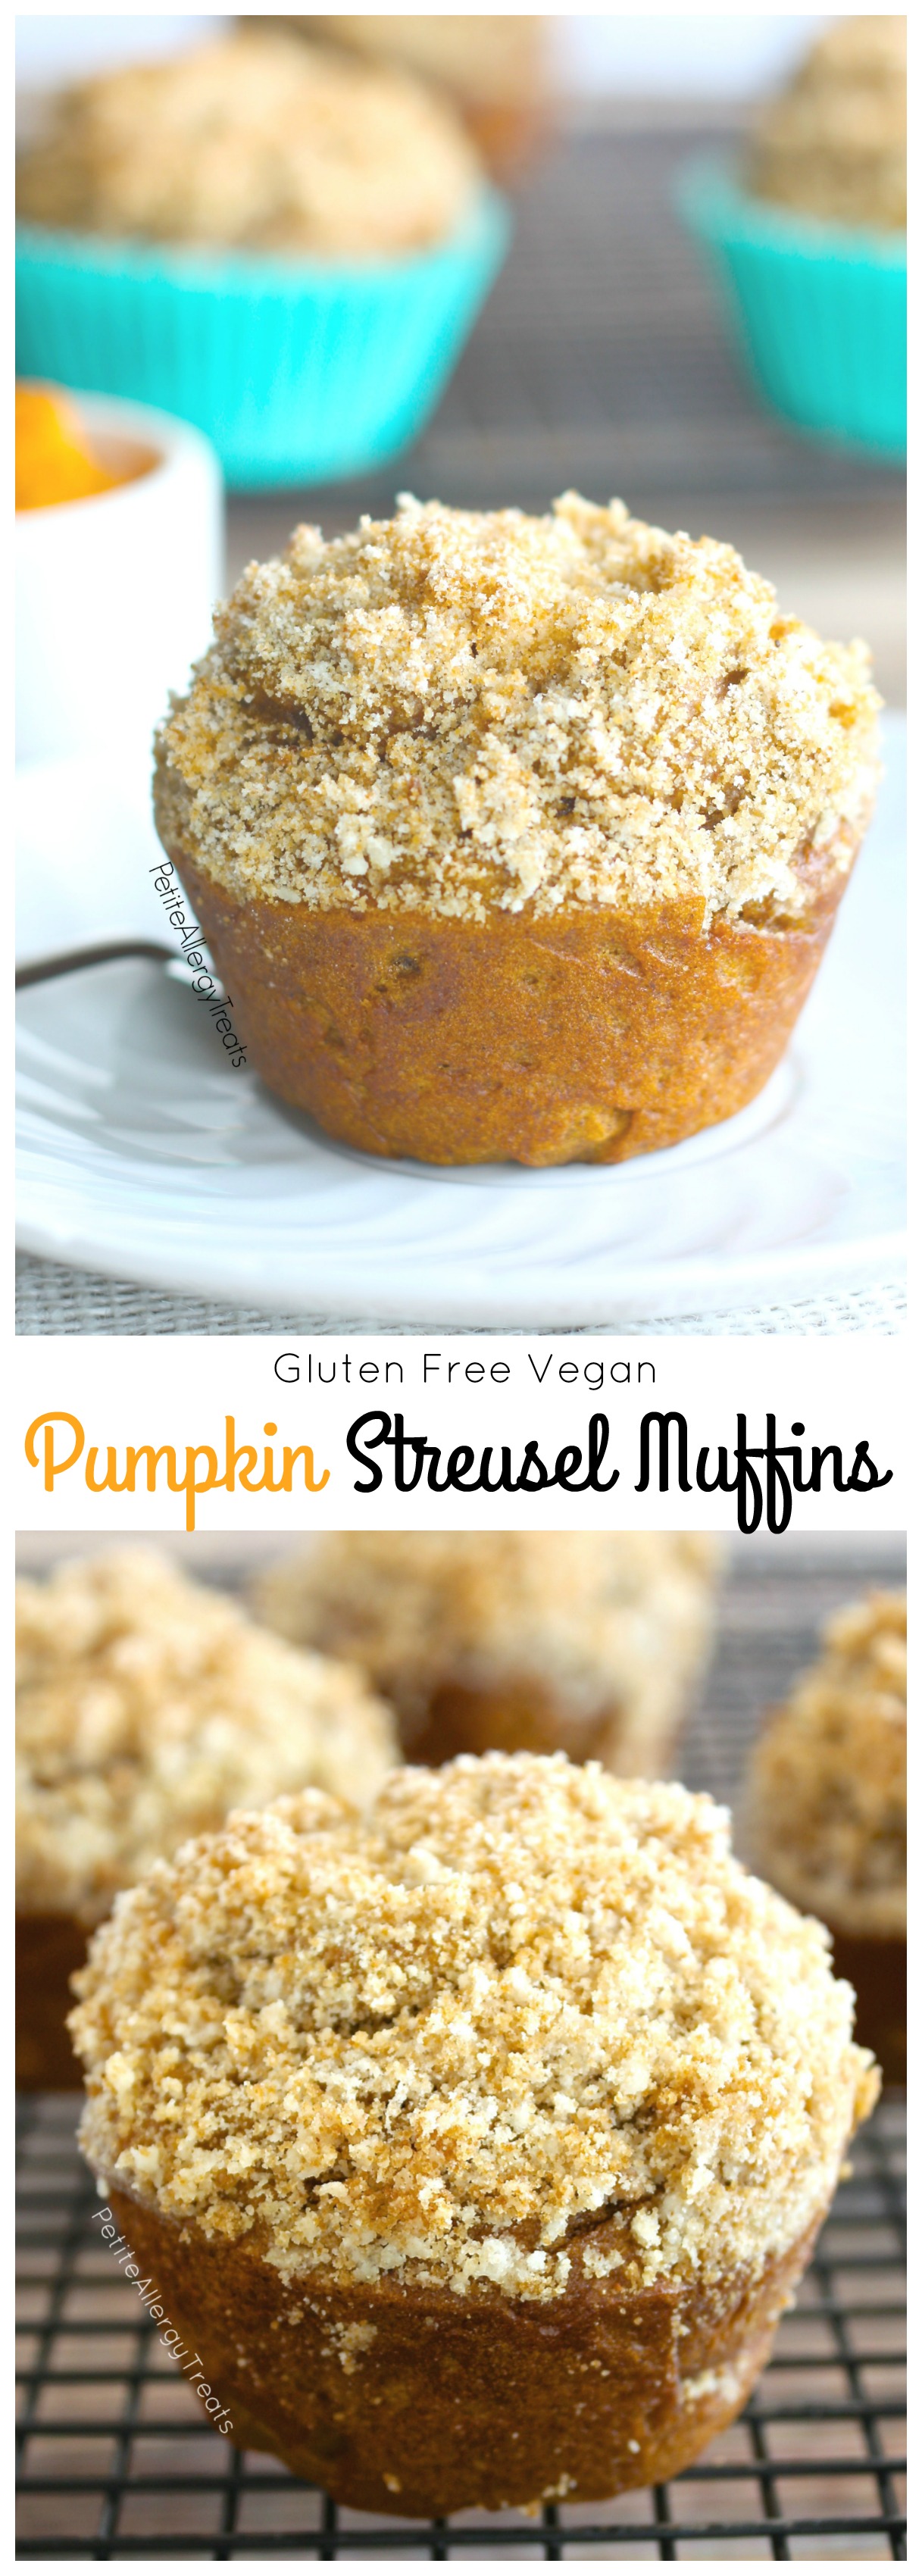 Gluten Free Pumpkin Streusel Muffins (vegan) Delicious pumpkin muffins with crumbly bakery topping